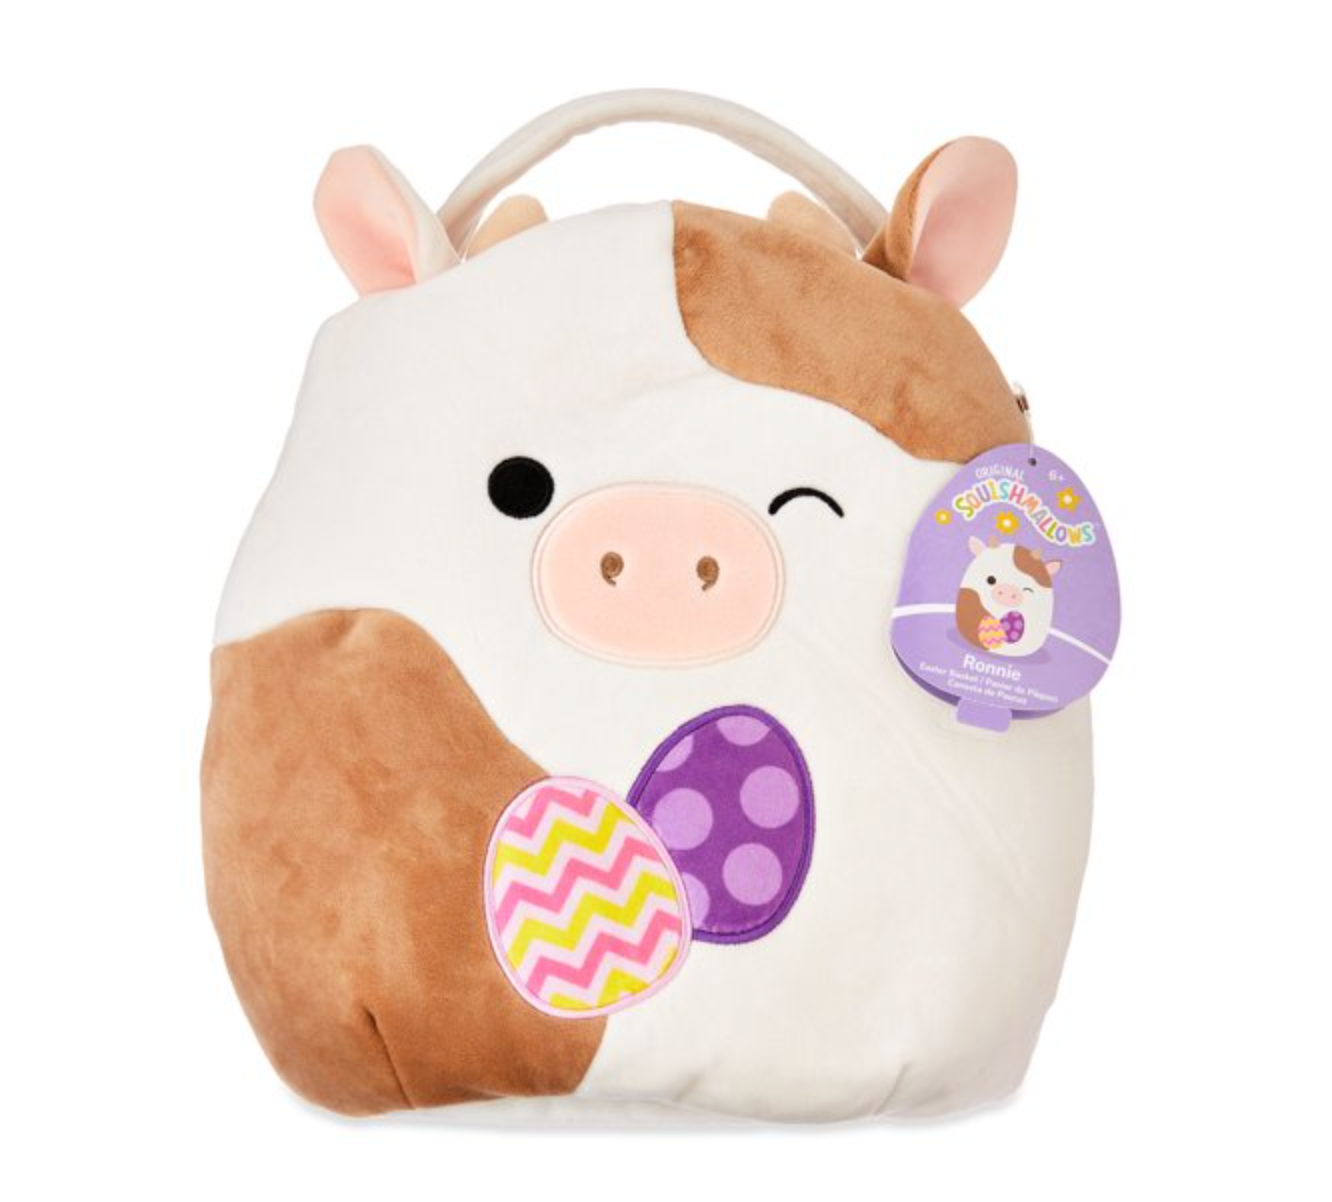 Squishmallows Ronnie the Cow Easter Basket Plush New with Tag